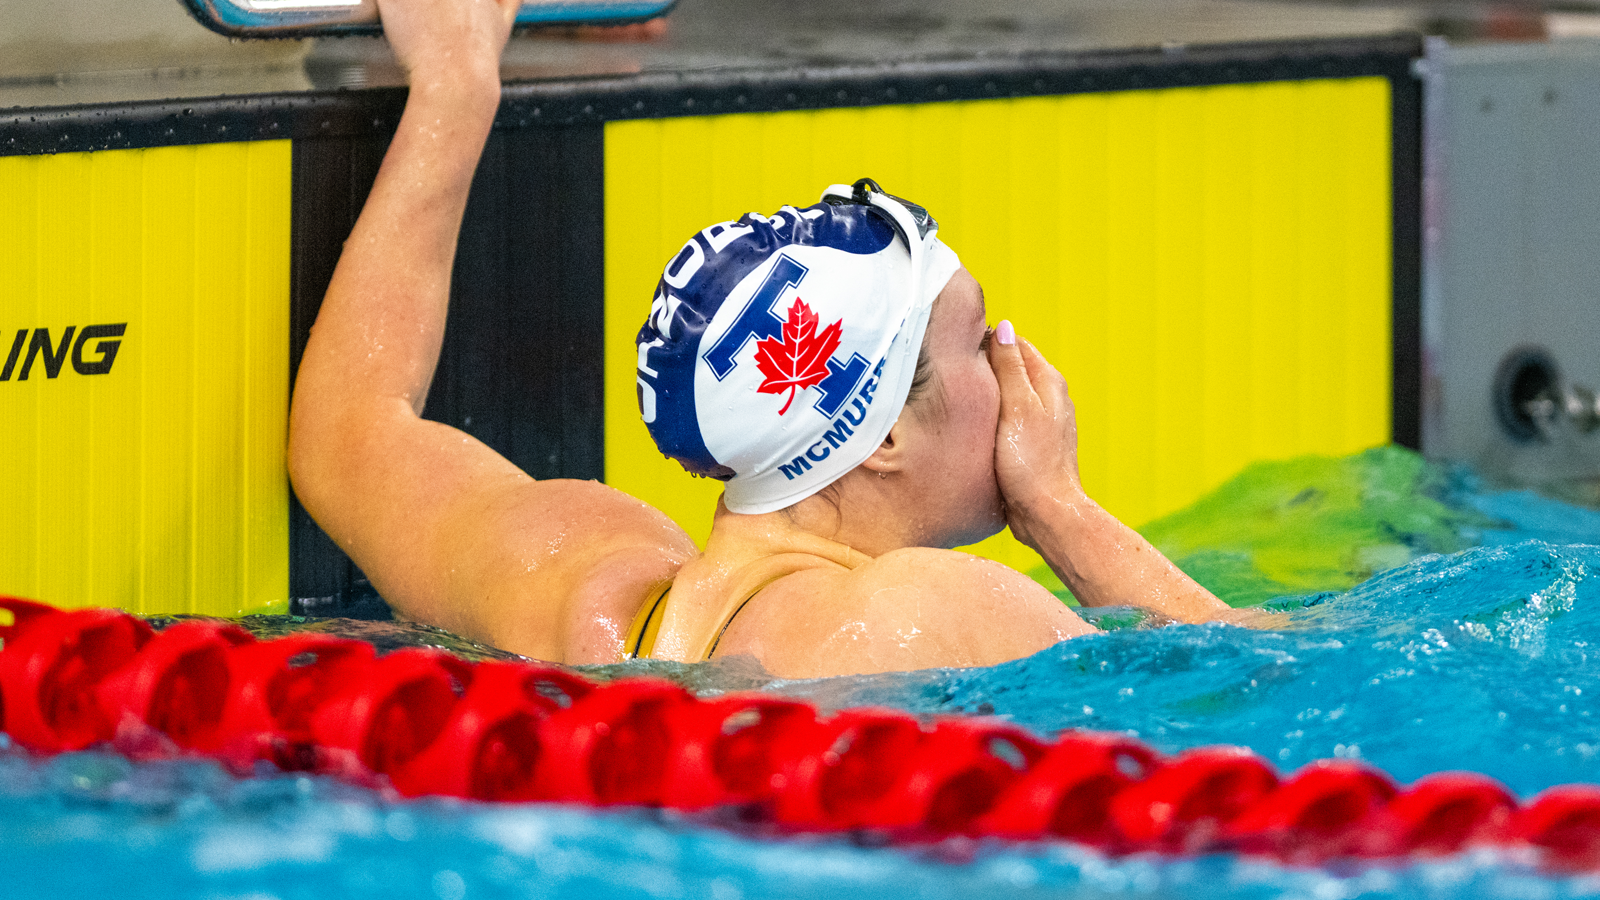 Toronto women's swimmer Ainsley McMurray covering her mouth in excitement while holding on to the wall in the pool after a race